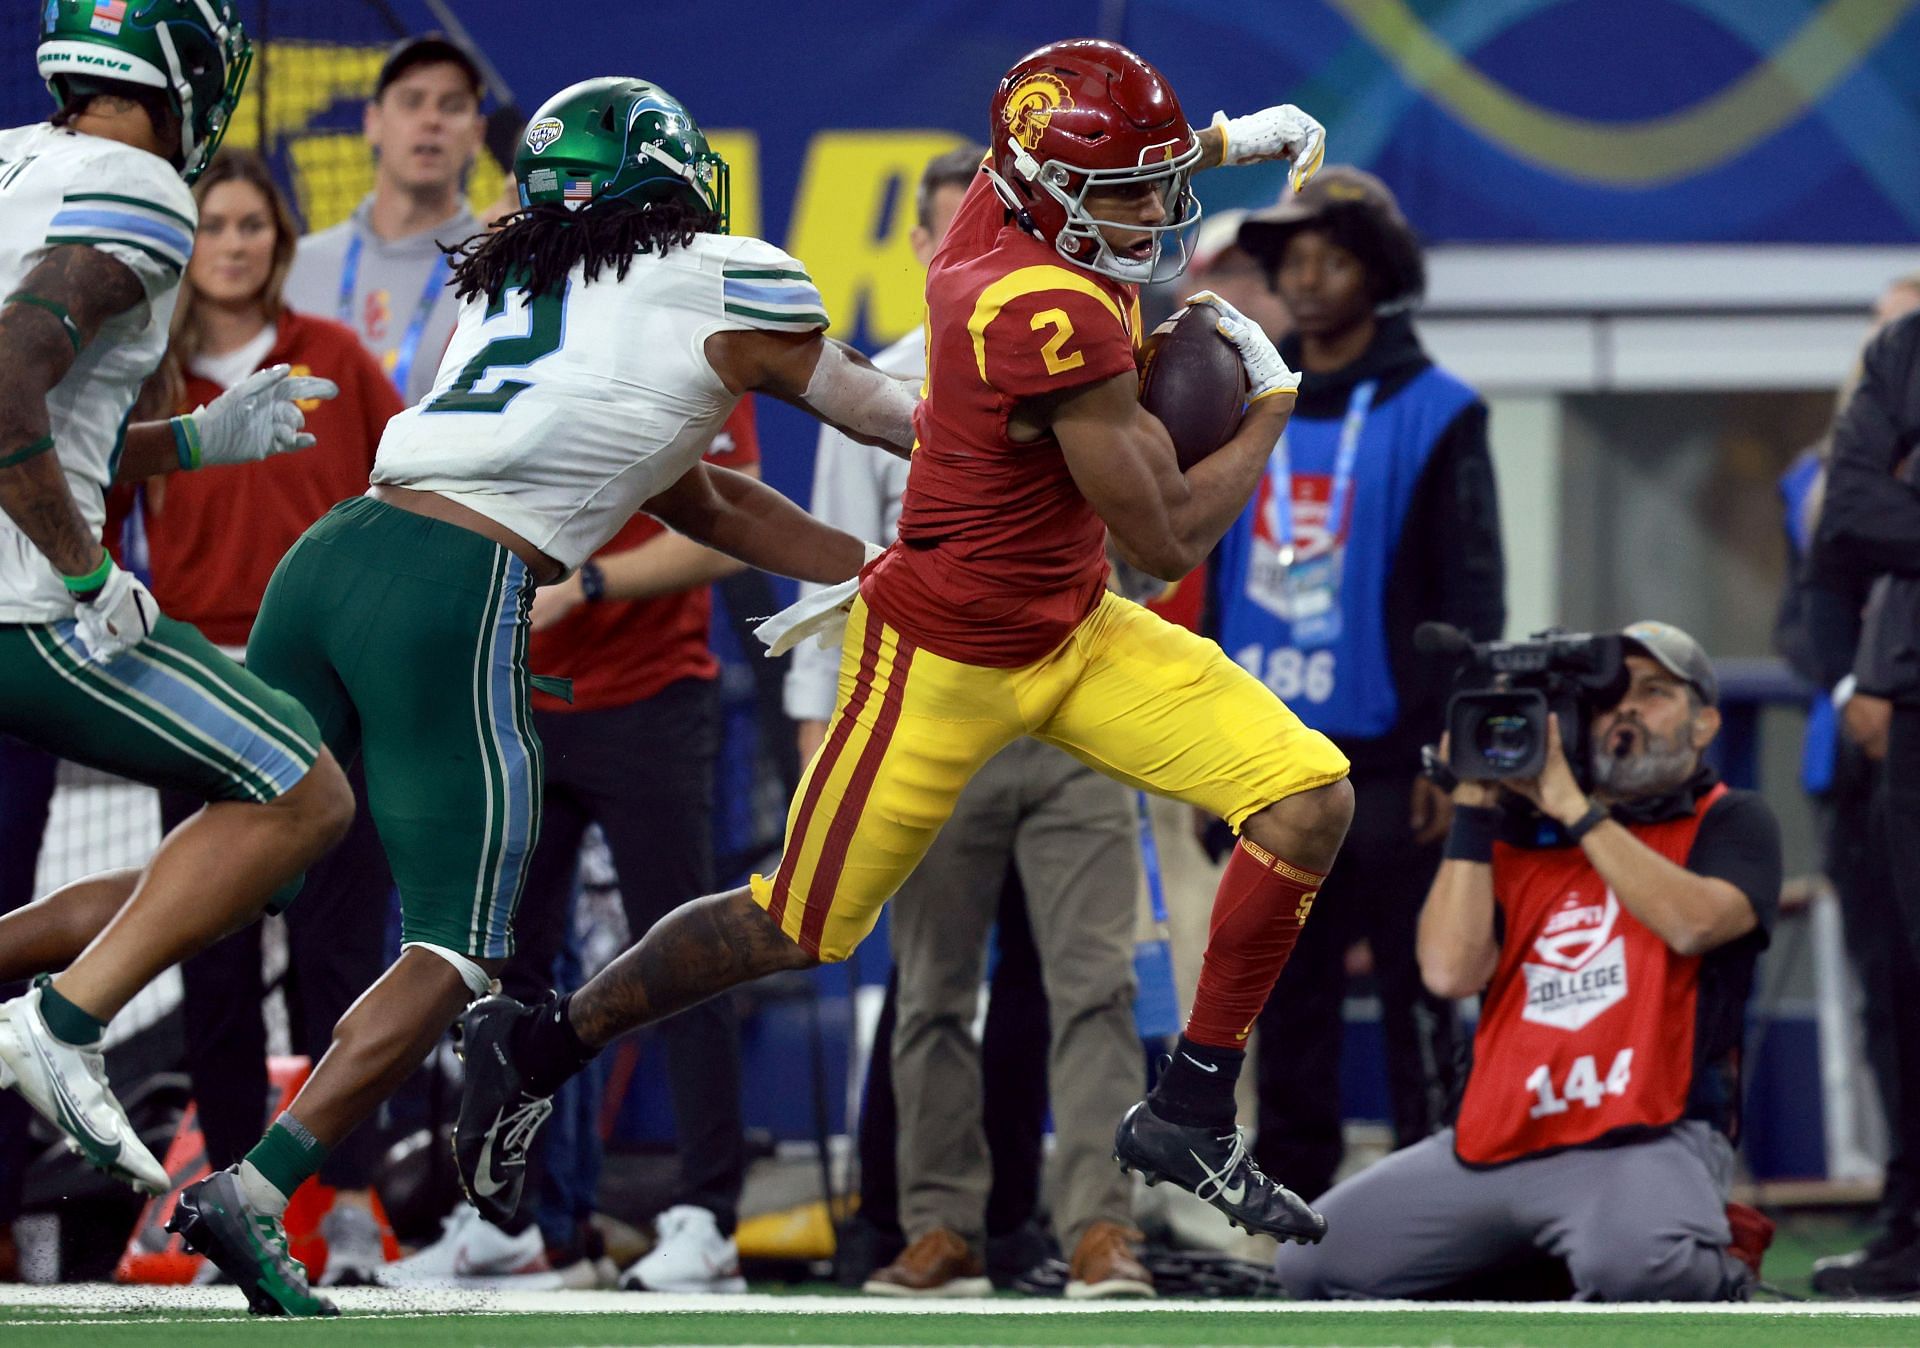 Brenden Rice #2 of the USC Trojans carries the ball against Dorian Williams #2 of the Tulane Green Wave